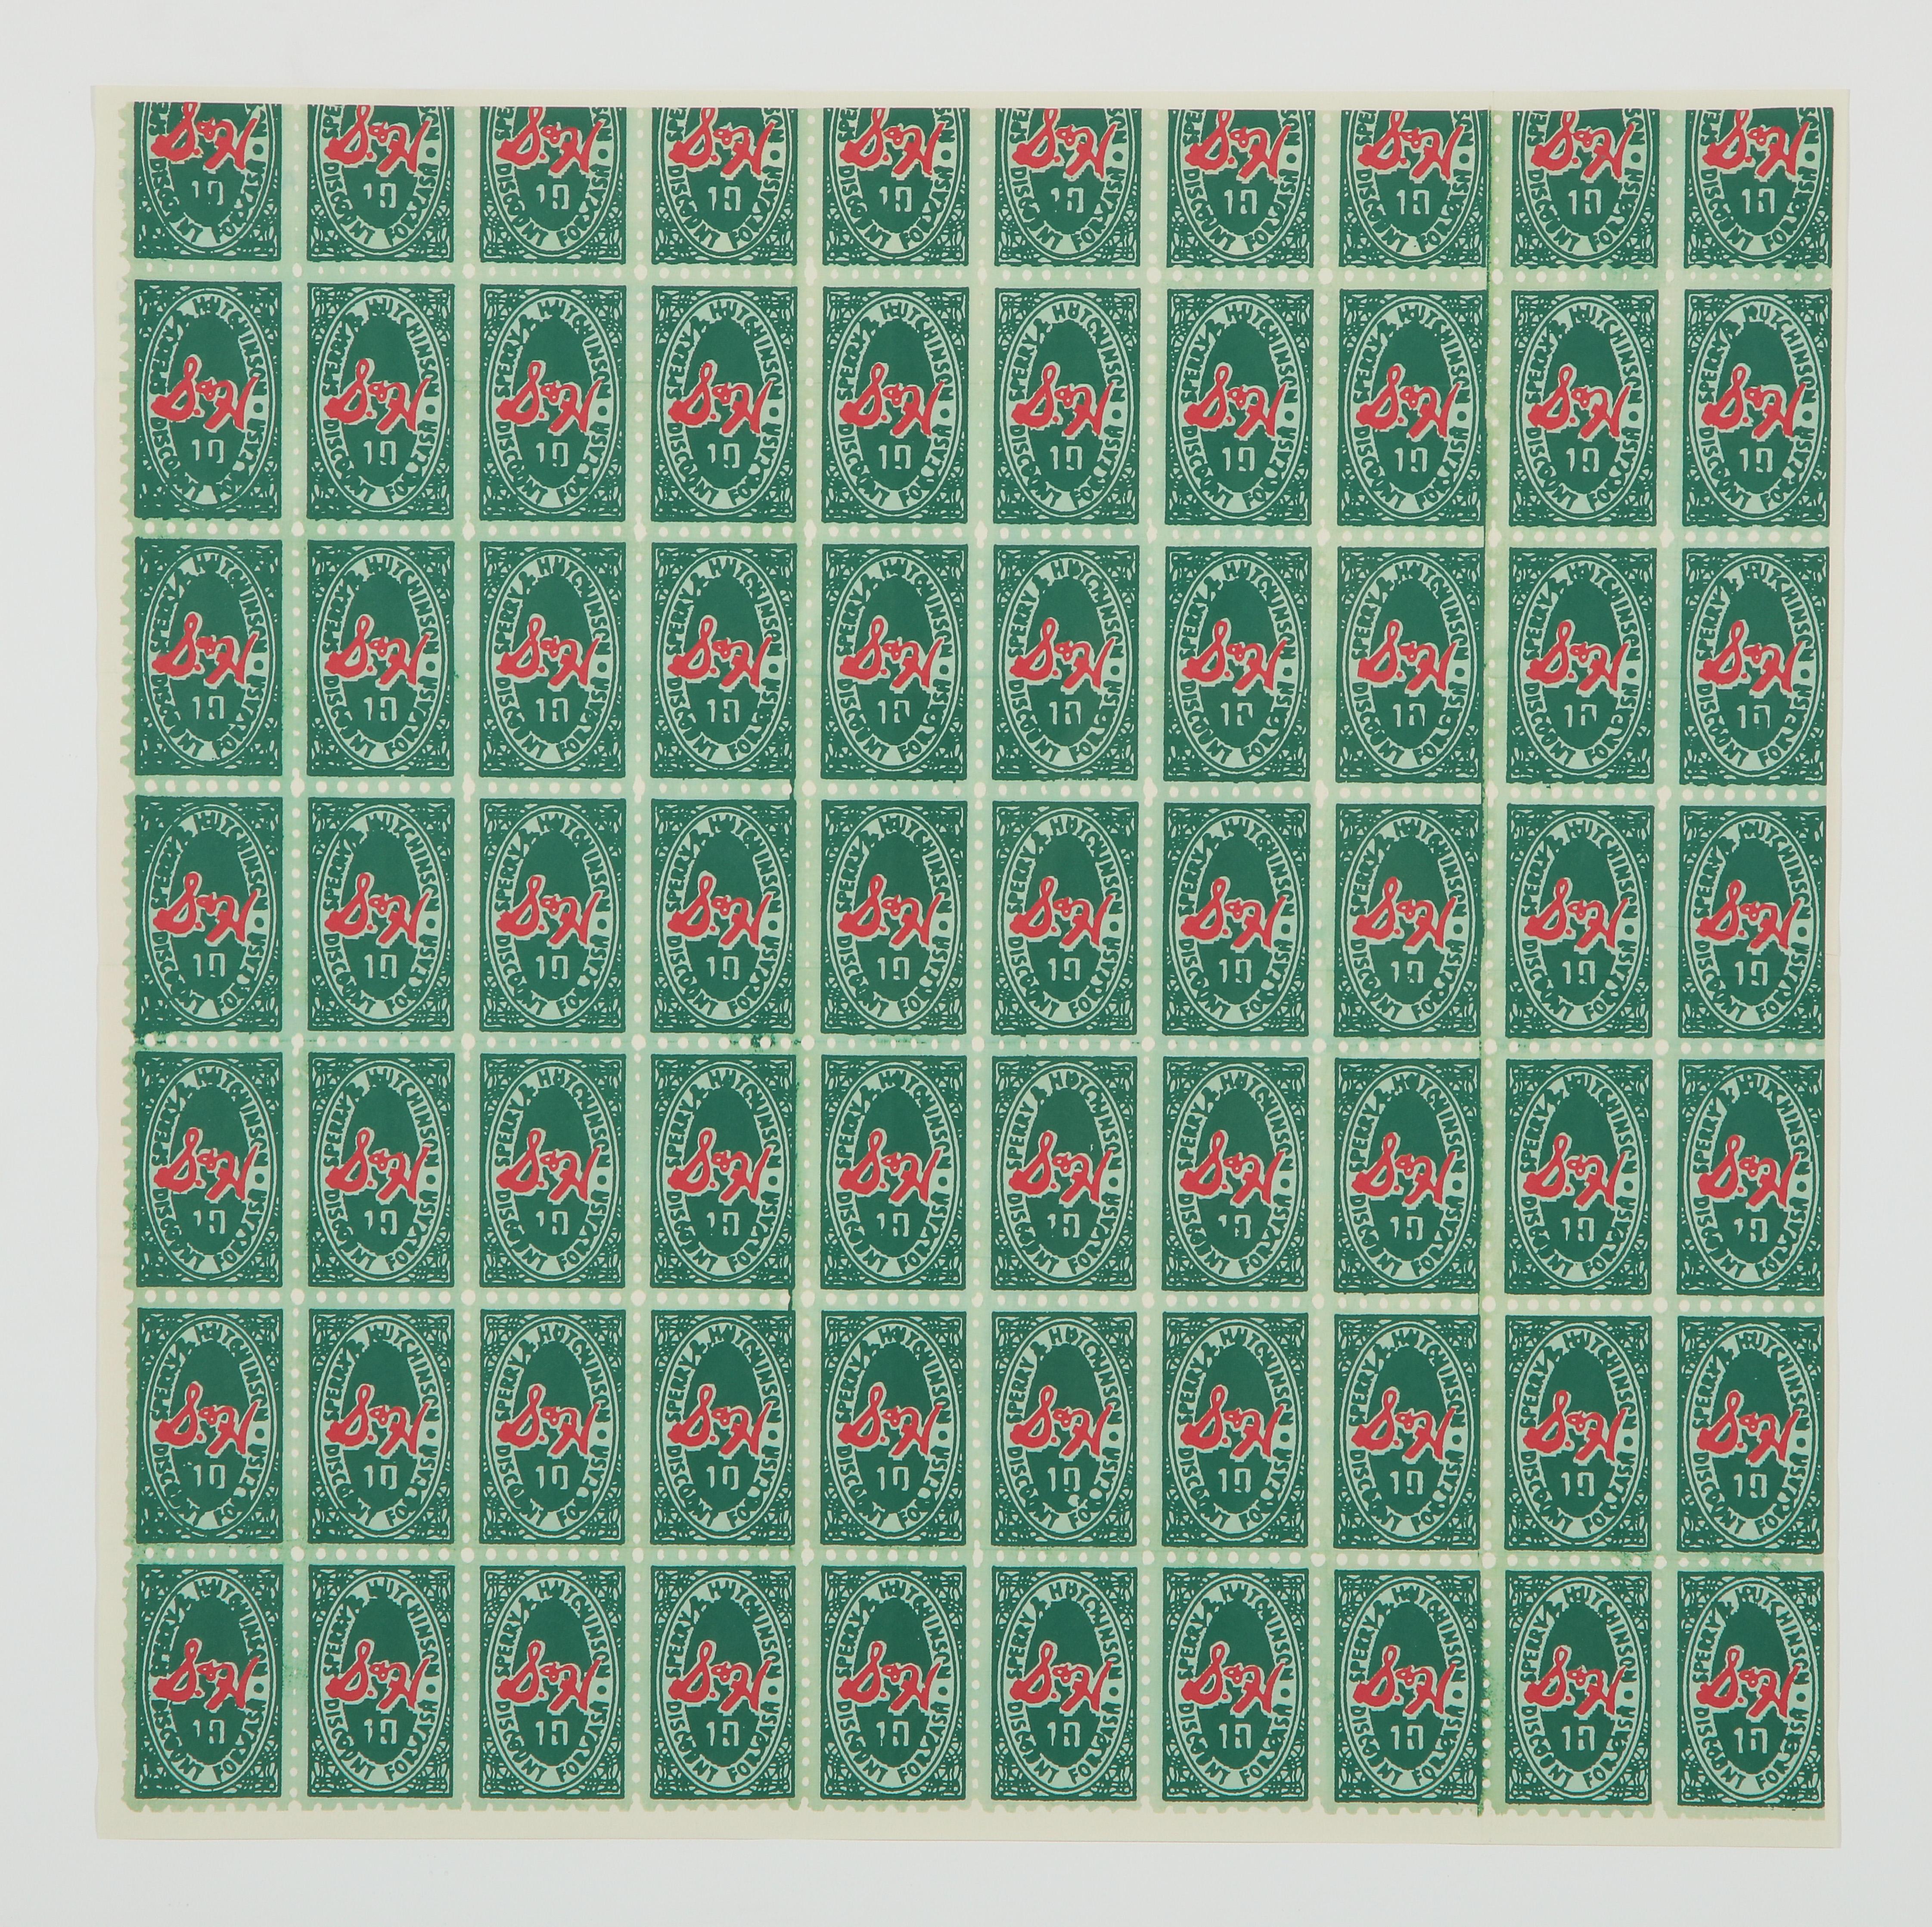 S & H Green Stamps After Andy Warhol Mailer Invitation  - Print by (after) Andy Warhol